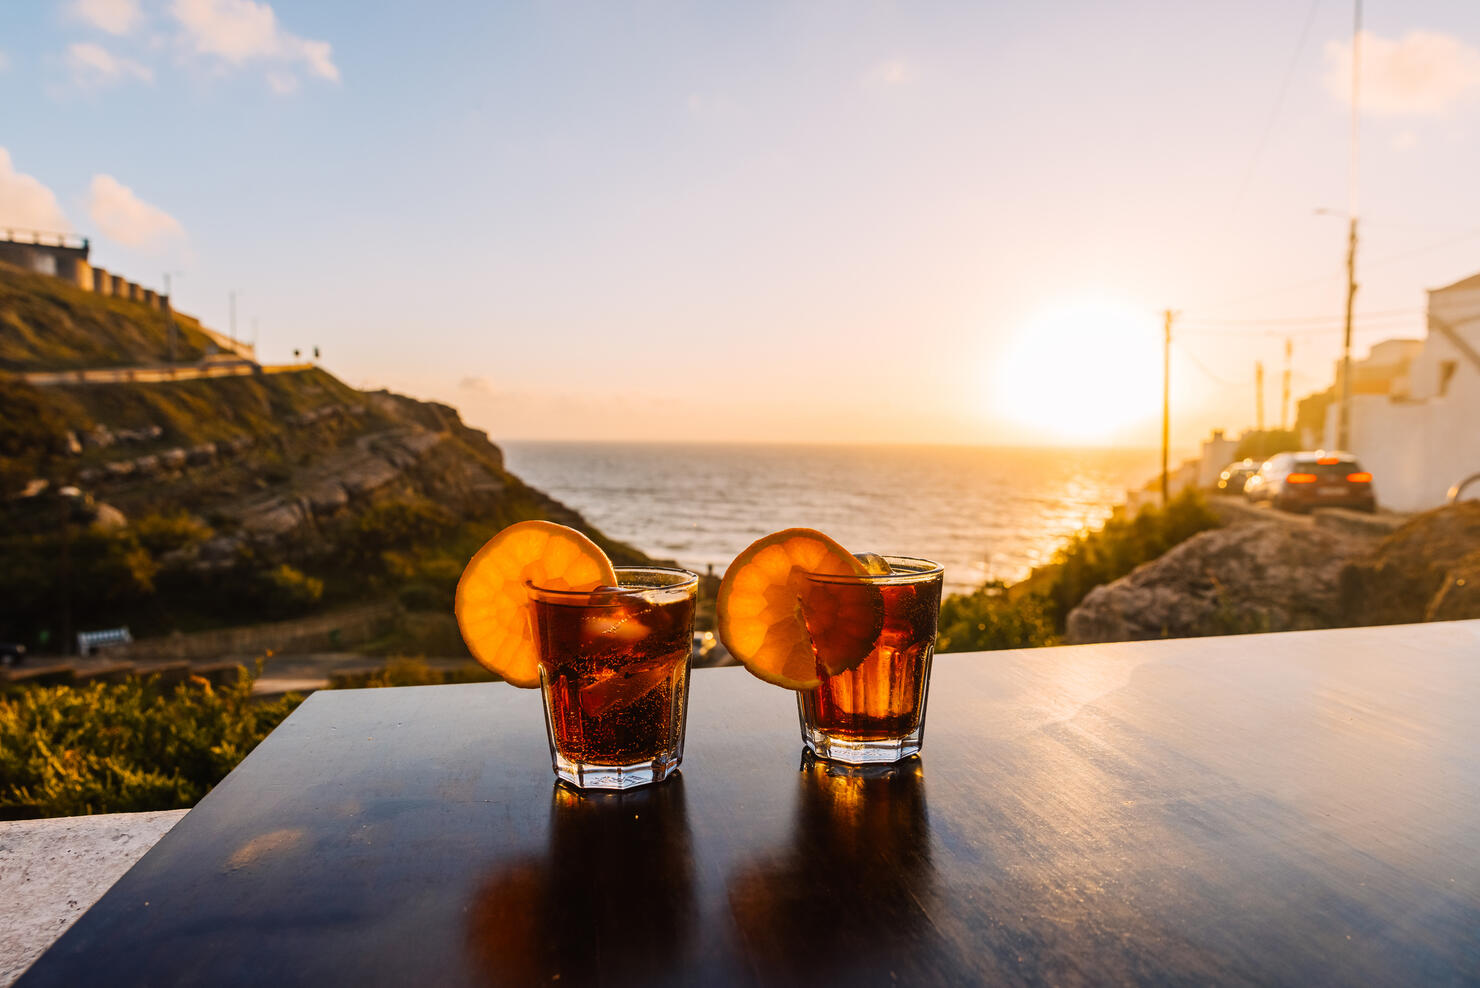 Two glasses with cocktails at the table by the ocean during sunset